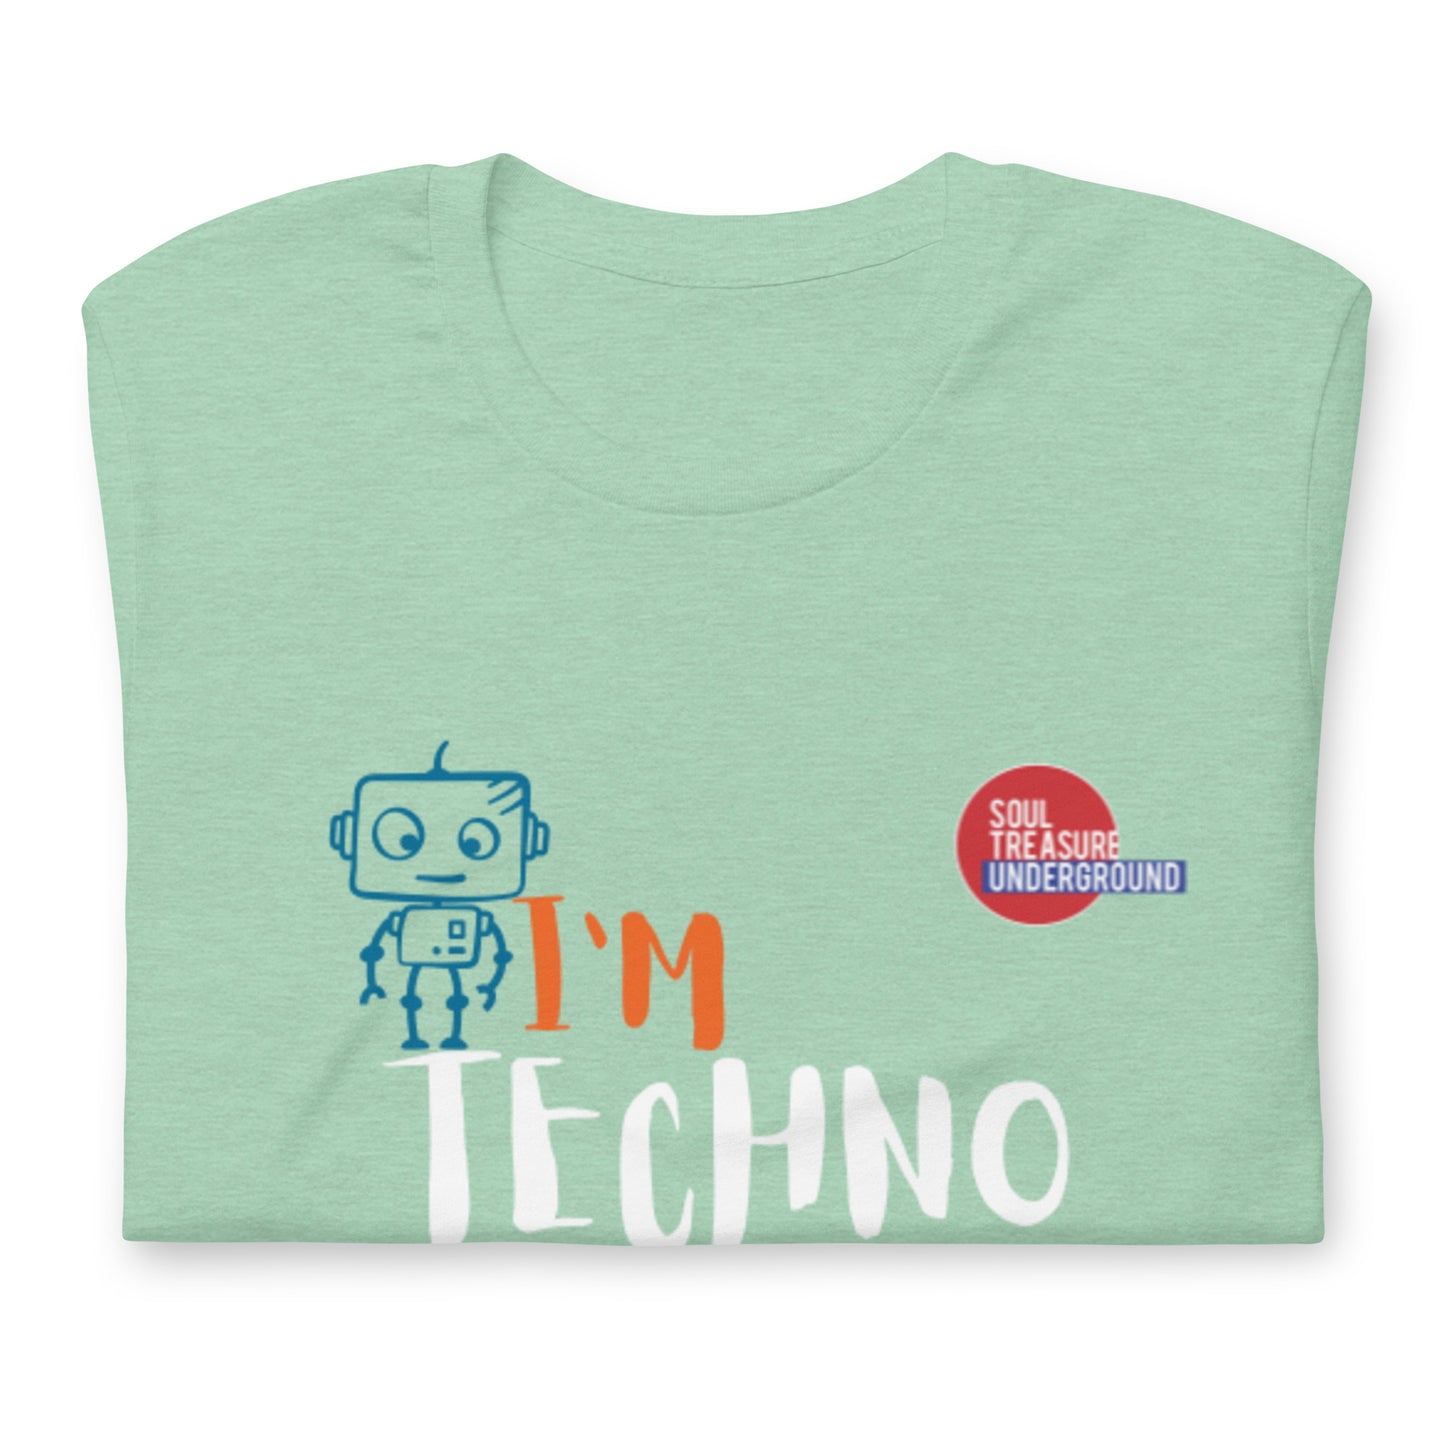 I'M TECHNO (Official Logo) T-Shirt (available in multiple NEW colors)